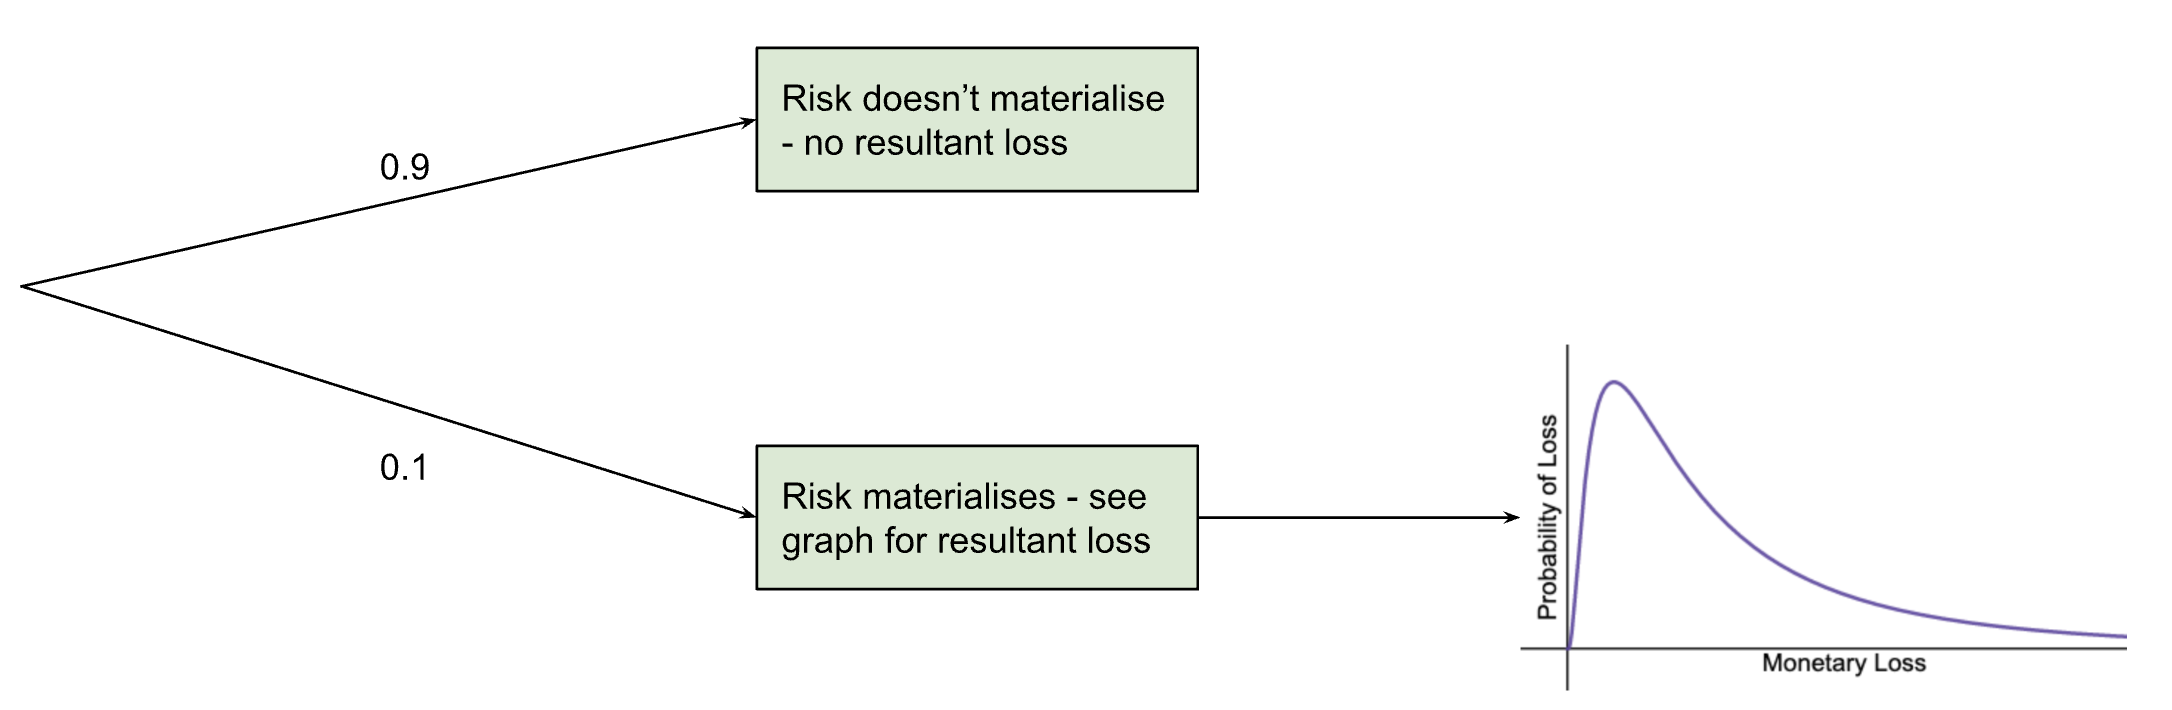 decision graph for a risk of less than 10% chance of occurring